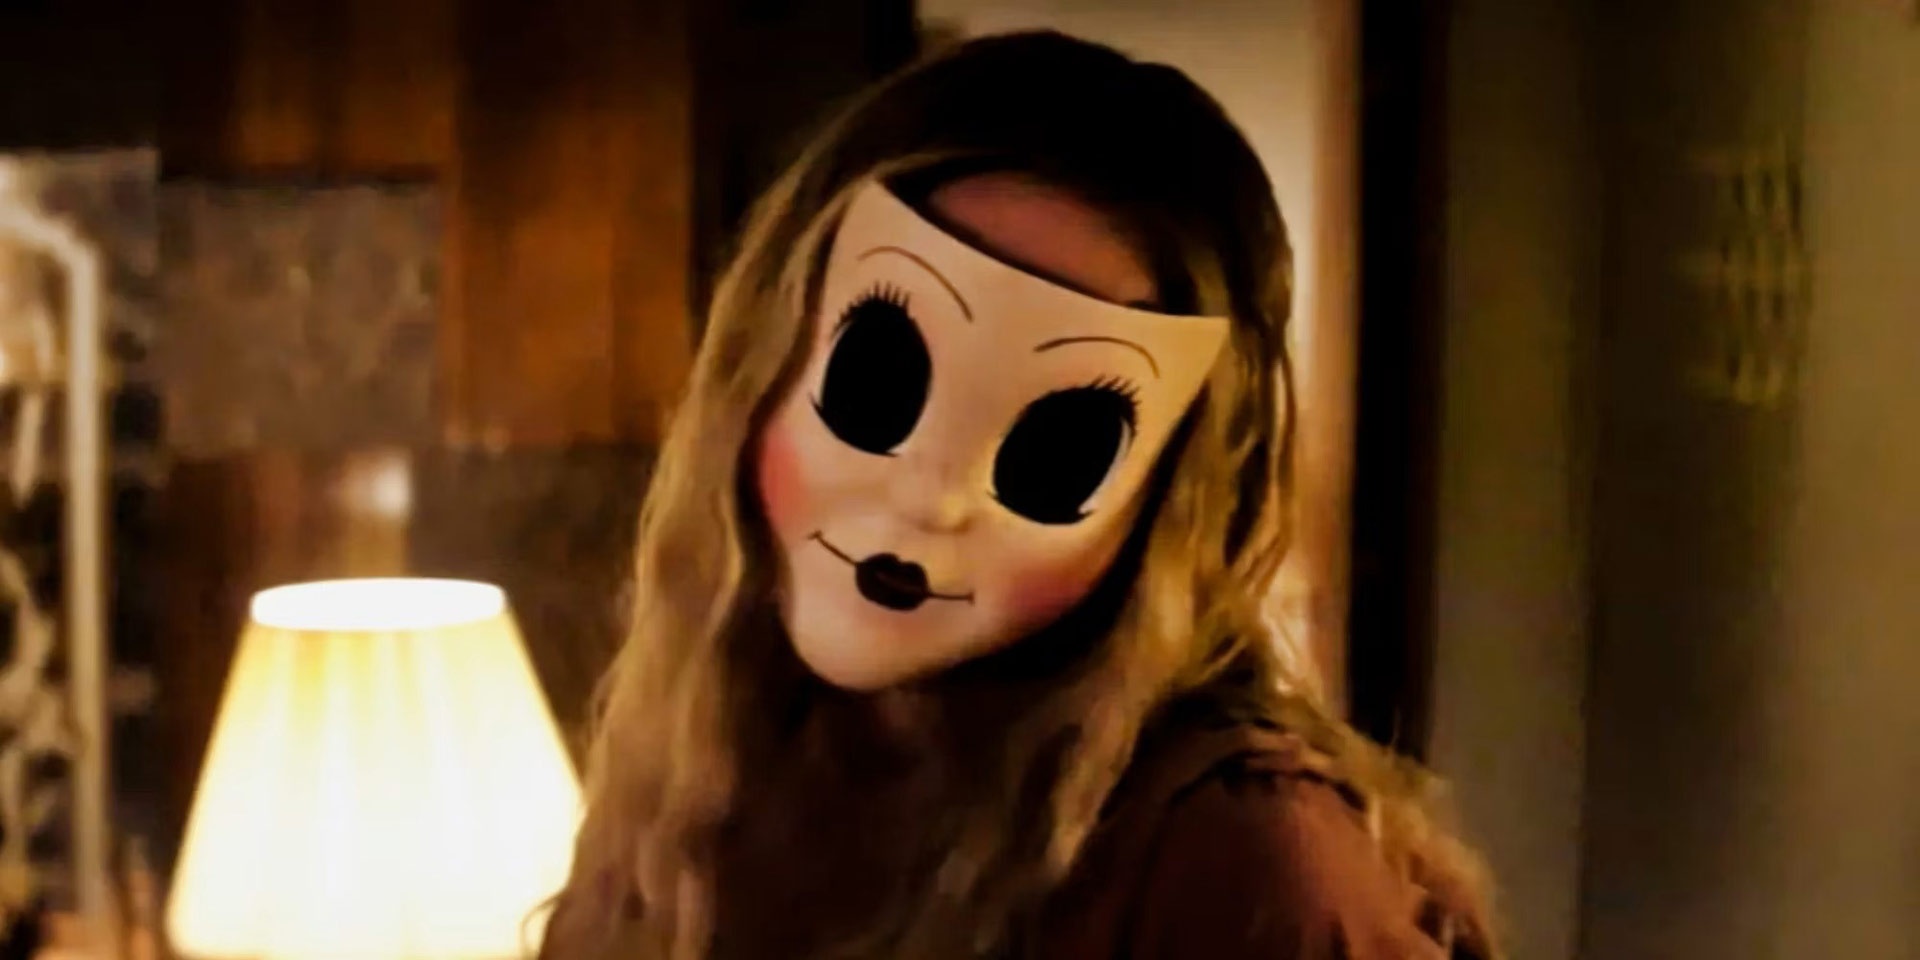 A doll mask in the movie Strangers - a girl with a doll mask